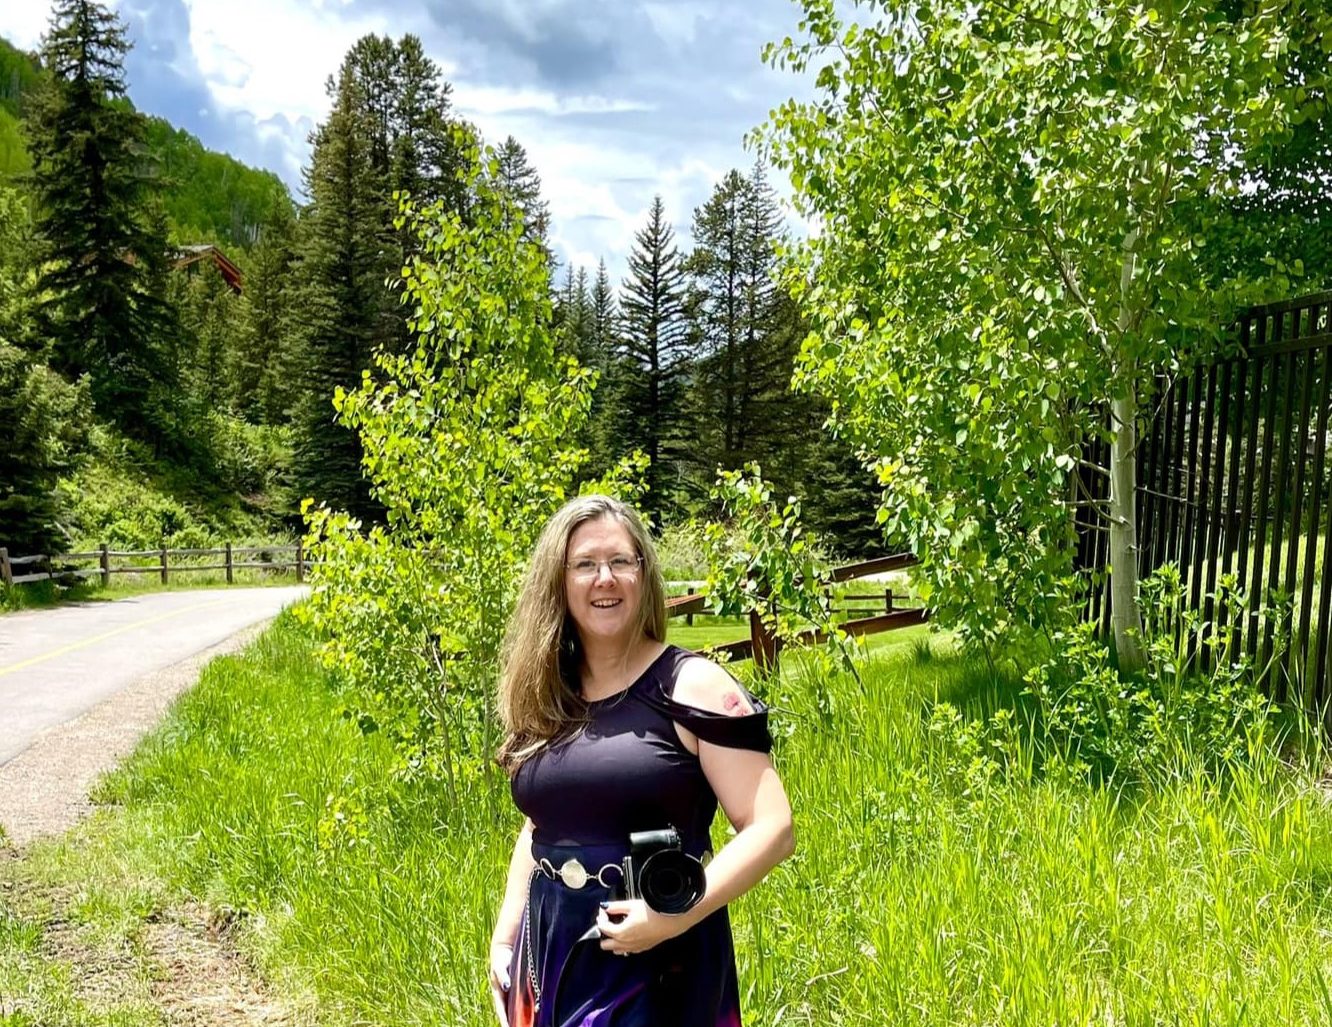 Angela Branson holds a camera and is looking at us. In the background, it is springtime in Vail, Colorado with bright green foliage everywhere and a road winding into the trees.